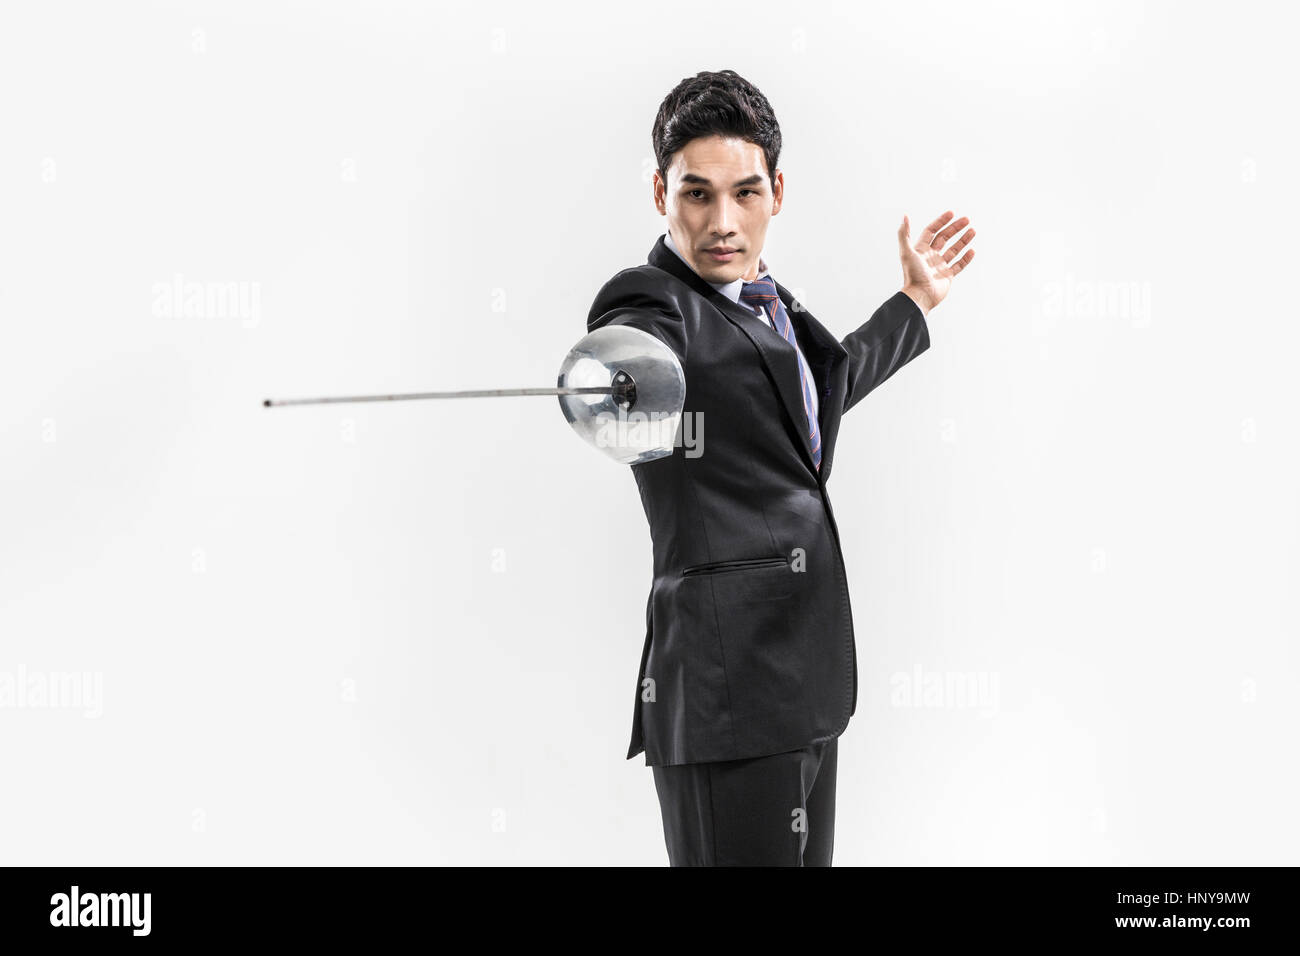 Businessman with fencing foil Stock Photo